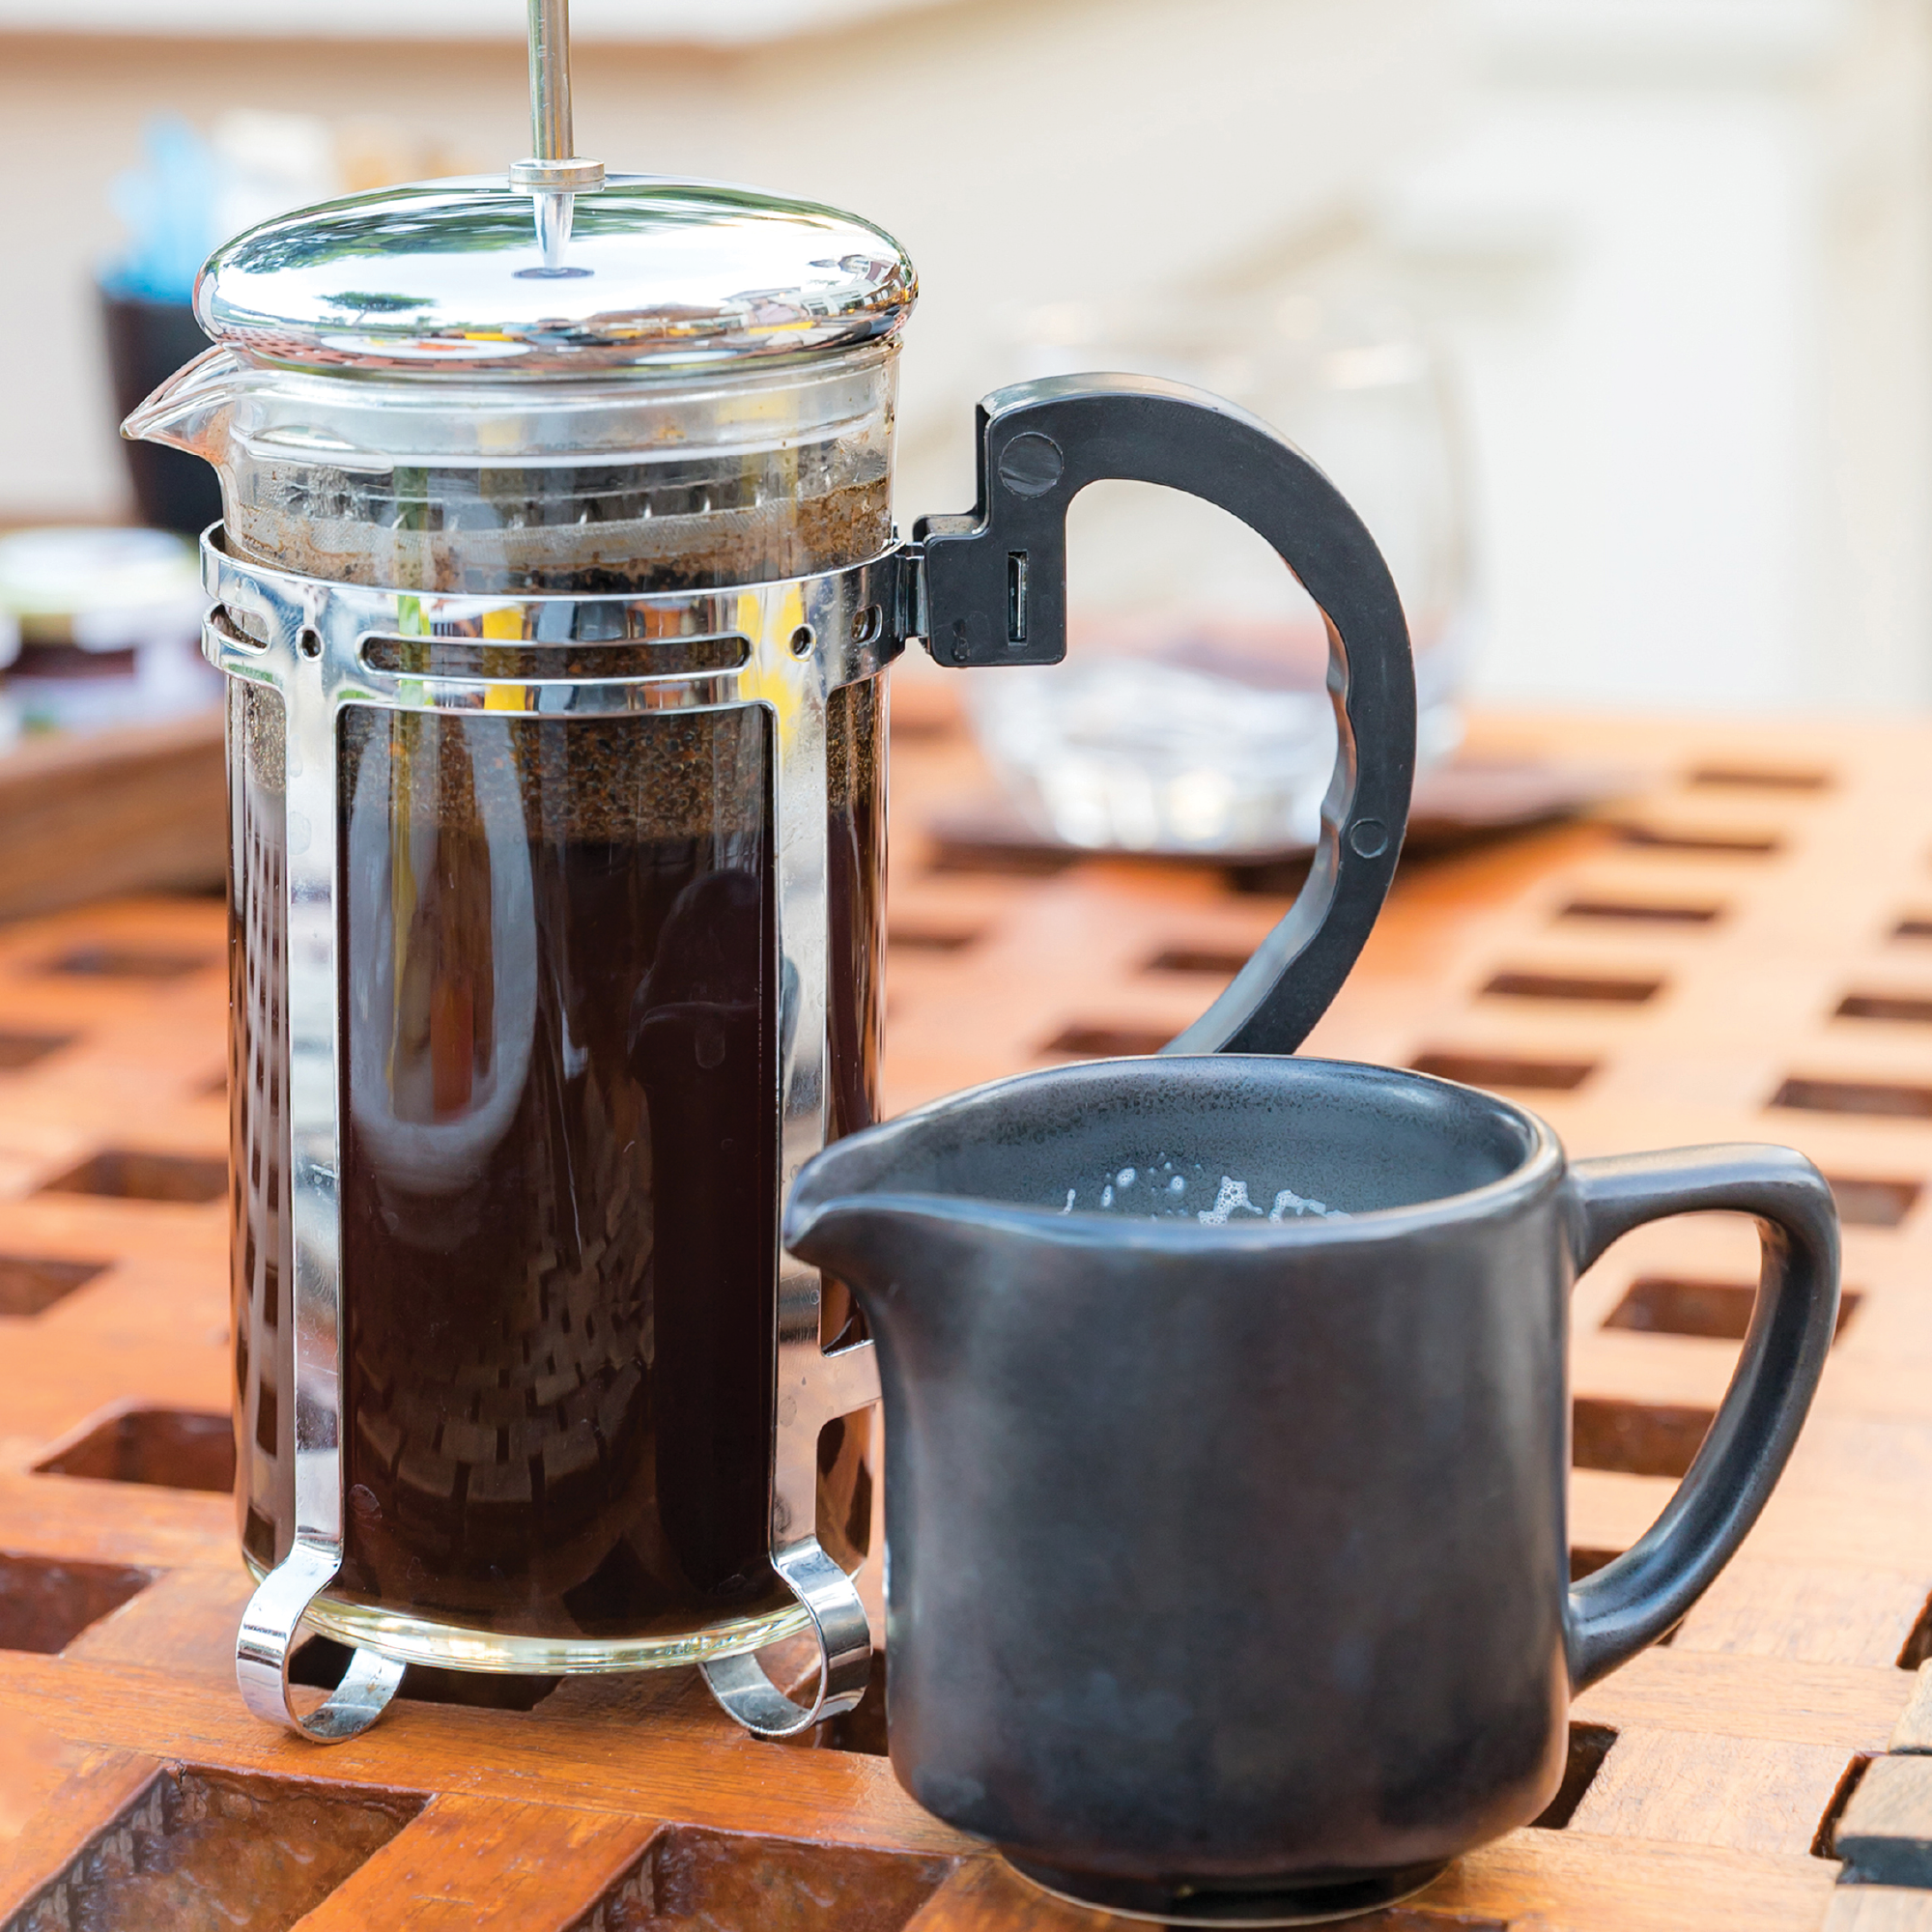 How to Make French Press Coffee in 6 Easy Steps